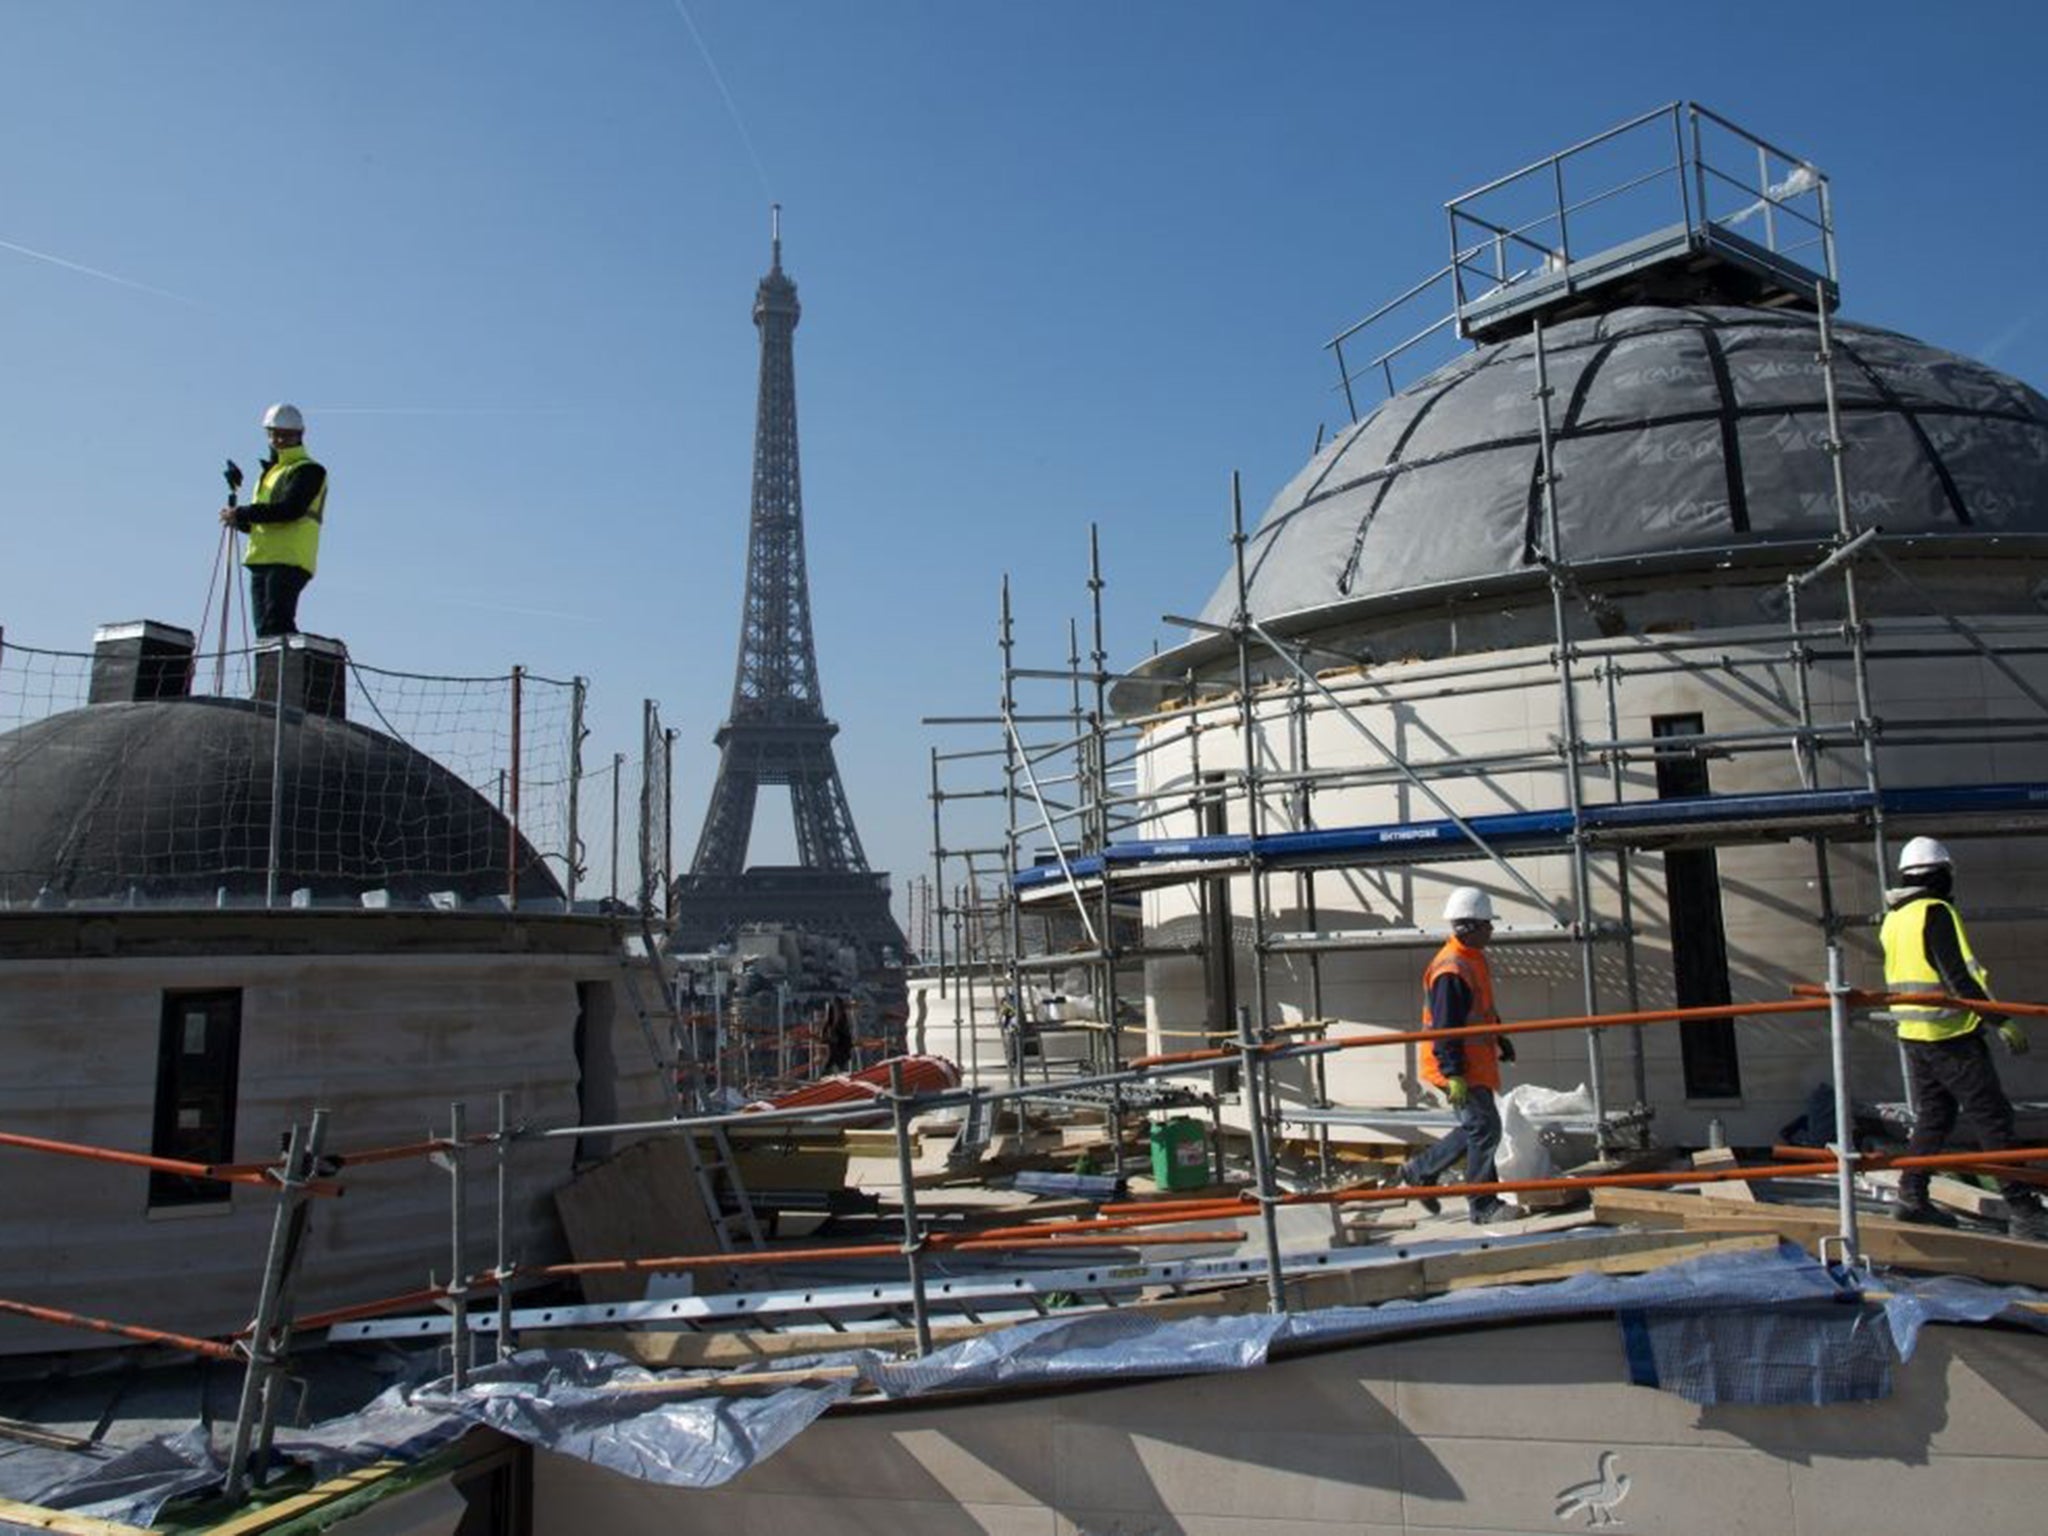 The new Russian Orthodox cathedral in Paris, close to the Eiffel Tower, is due to be finshed by October